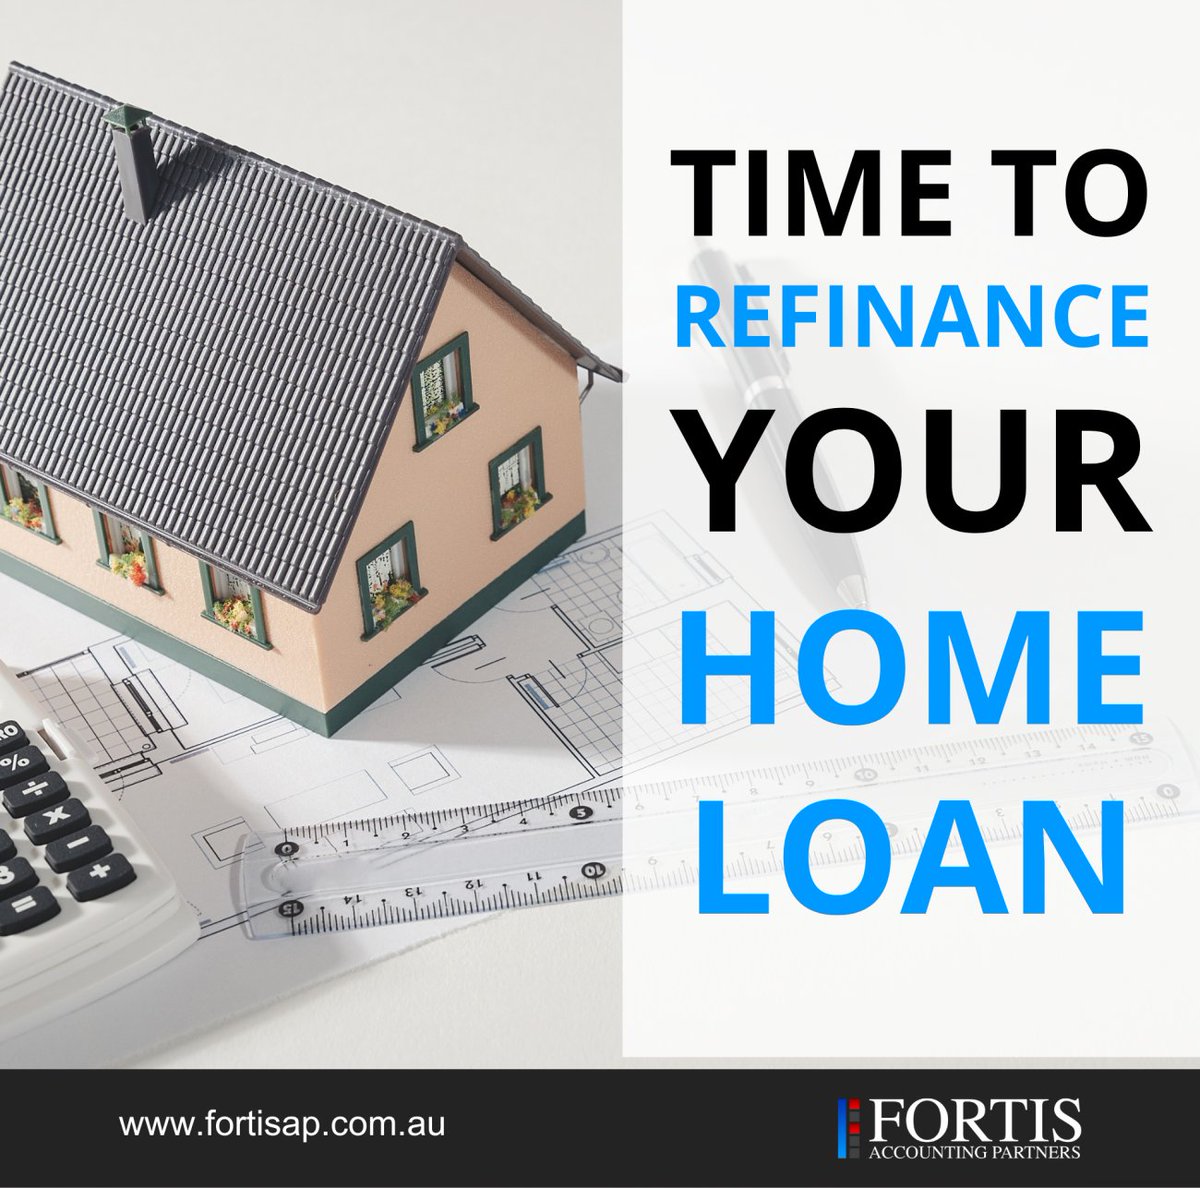 Don't wait any longer to refinance your home loan! With today's interest rates, now is the perfect time to explore your options and save money.

#refinance #lowinterestrates #homesavings #fortisap